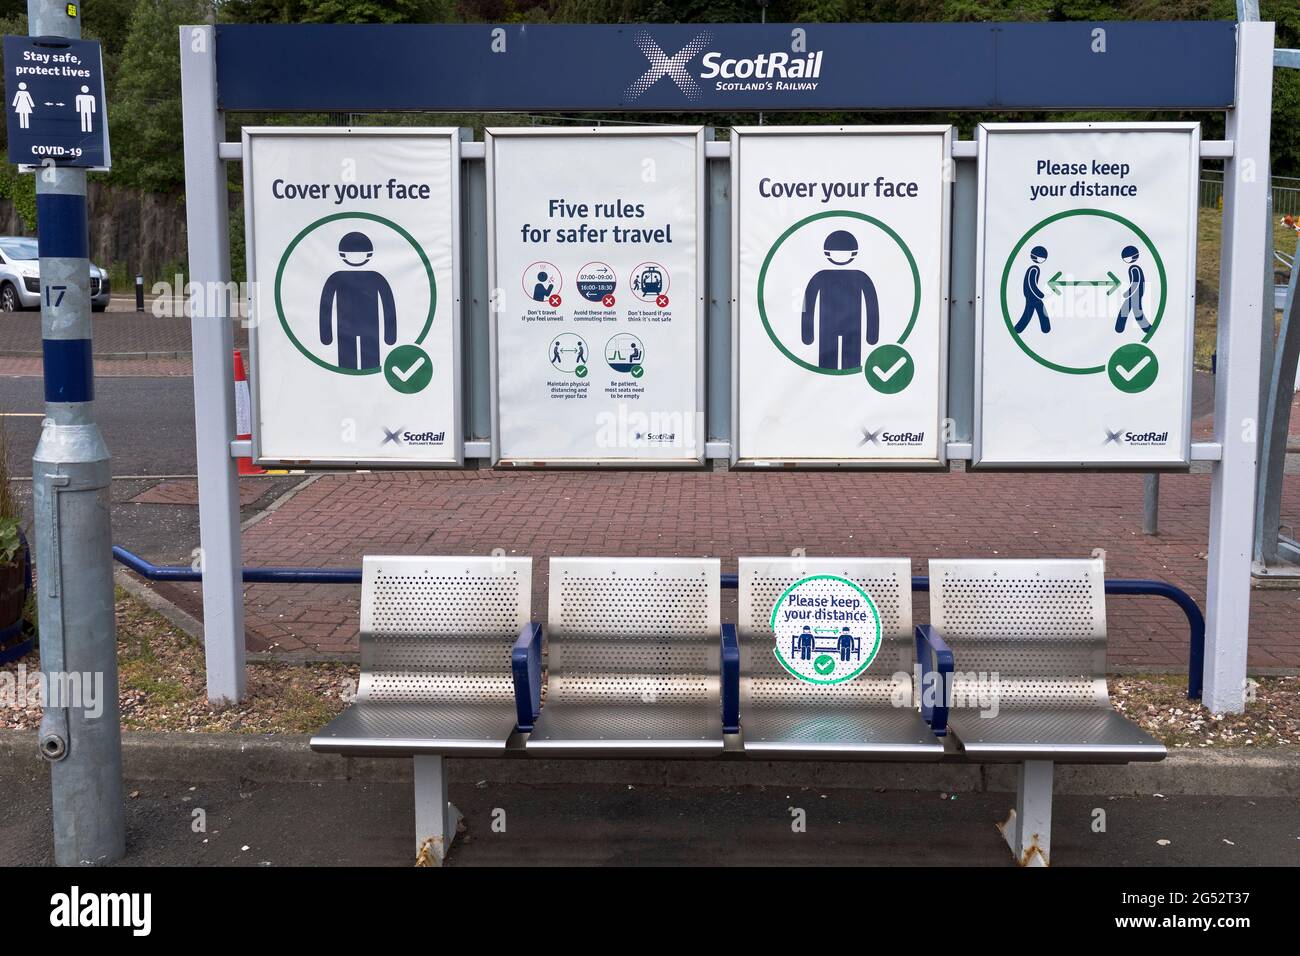 dh Covid 19 seating SCOTRAIL SCOTLAND Railway station platform seats covidsafe signs uk travel advice traveling sign Stock Photo